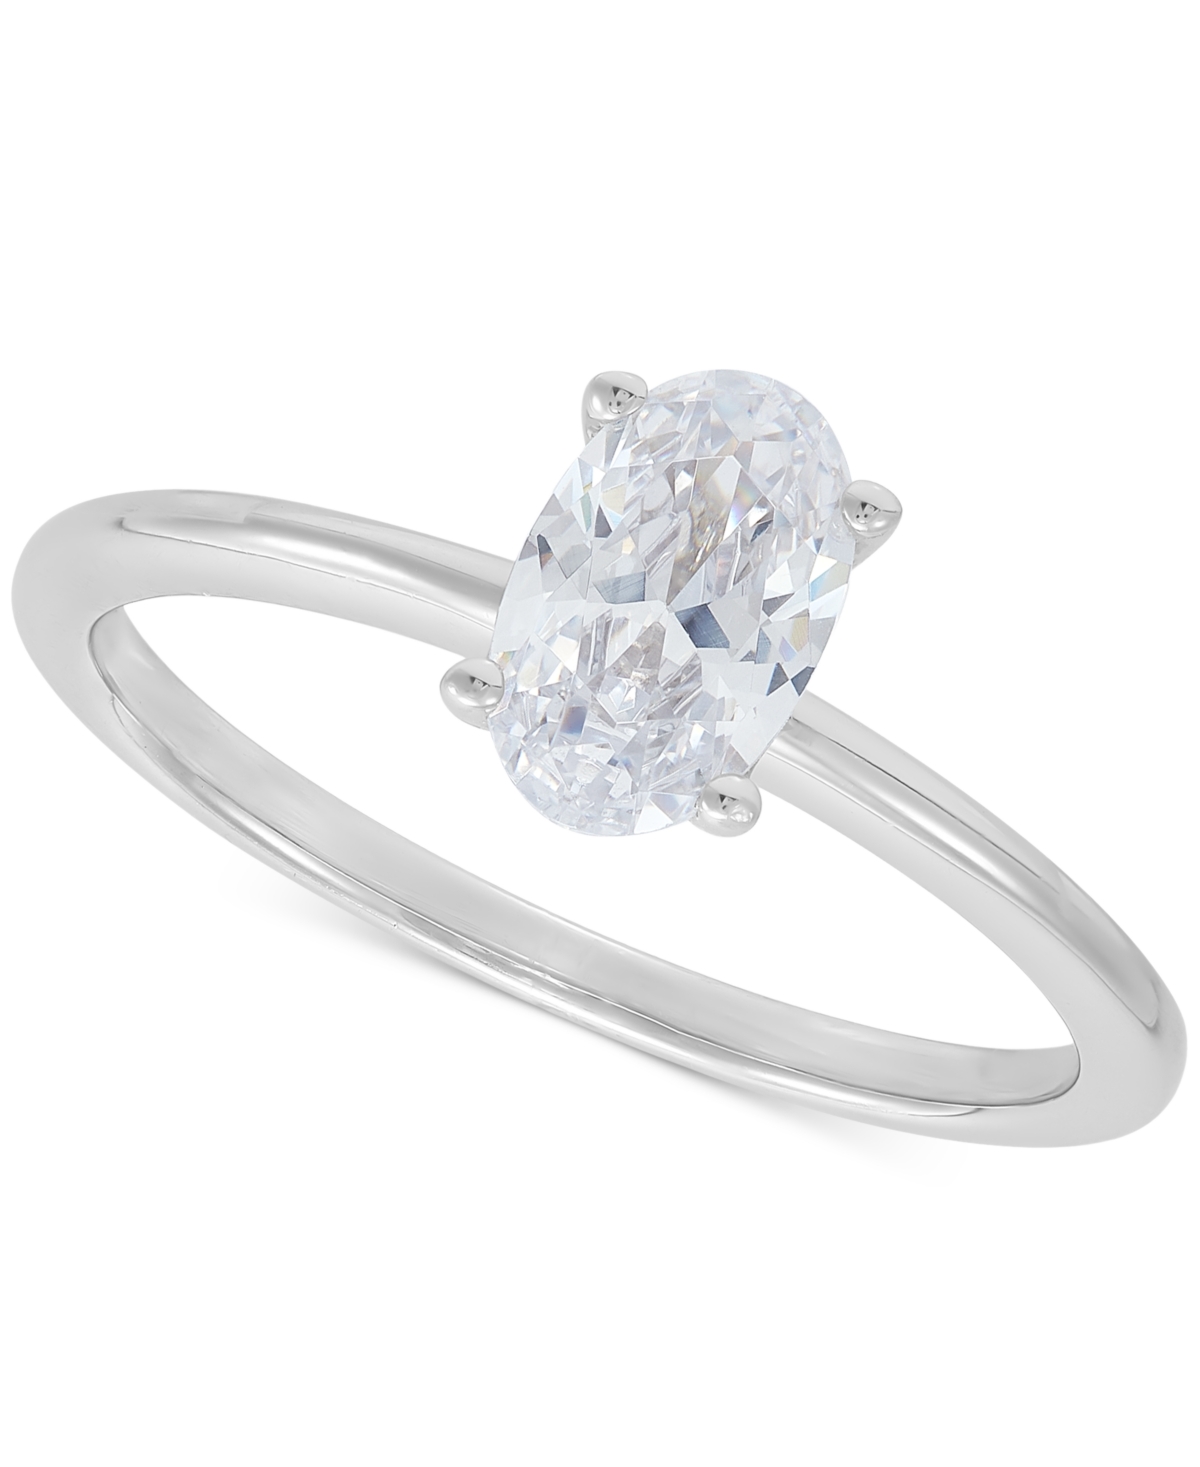 Igi Certified Lab Grown Diamond Oval Solitaire Engagement Ring (1 ct. t.w.) in 14k White Gold - White Gold